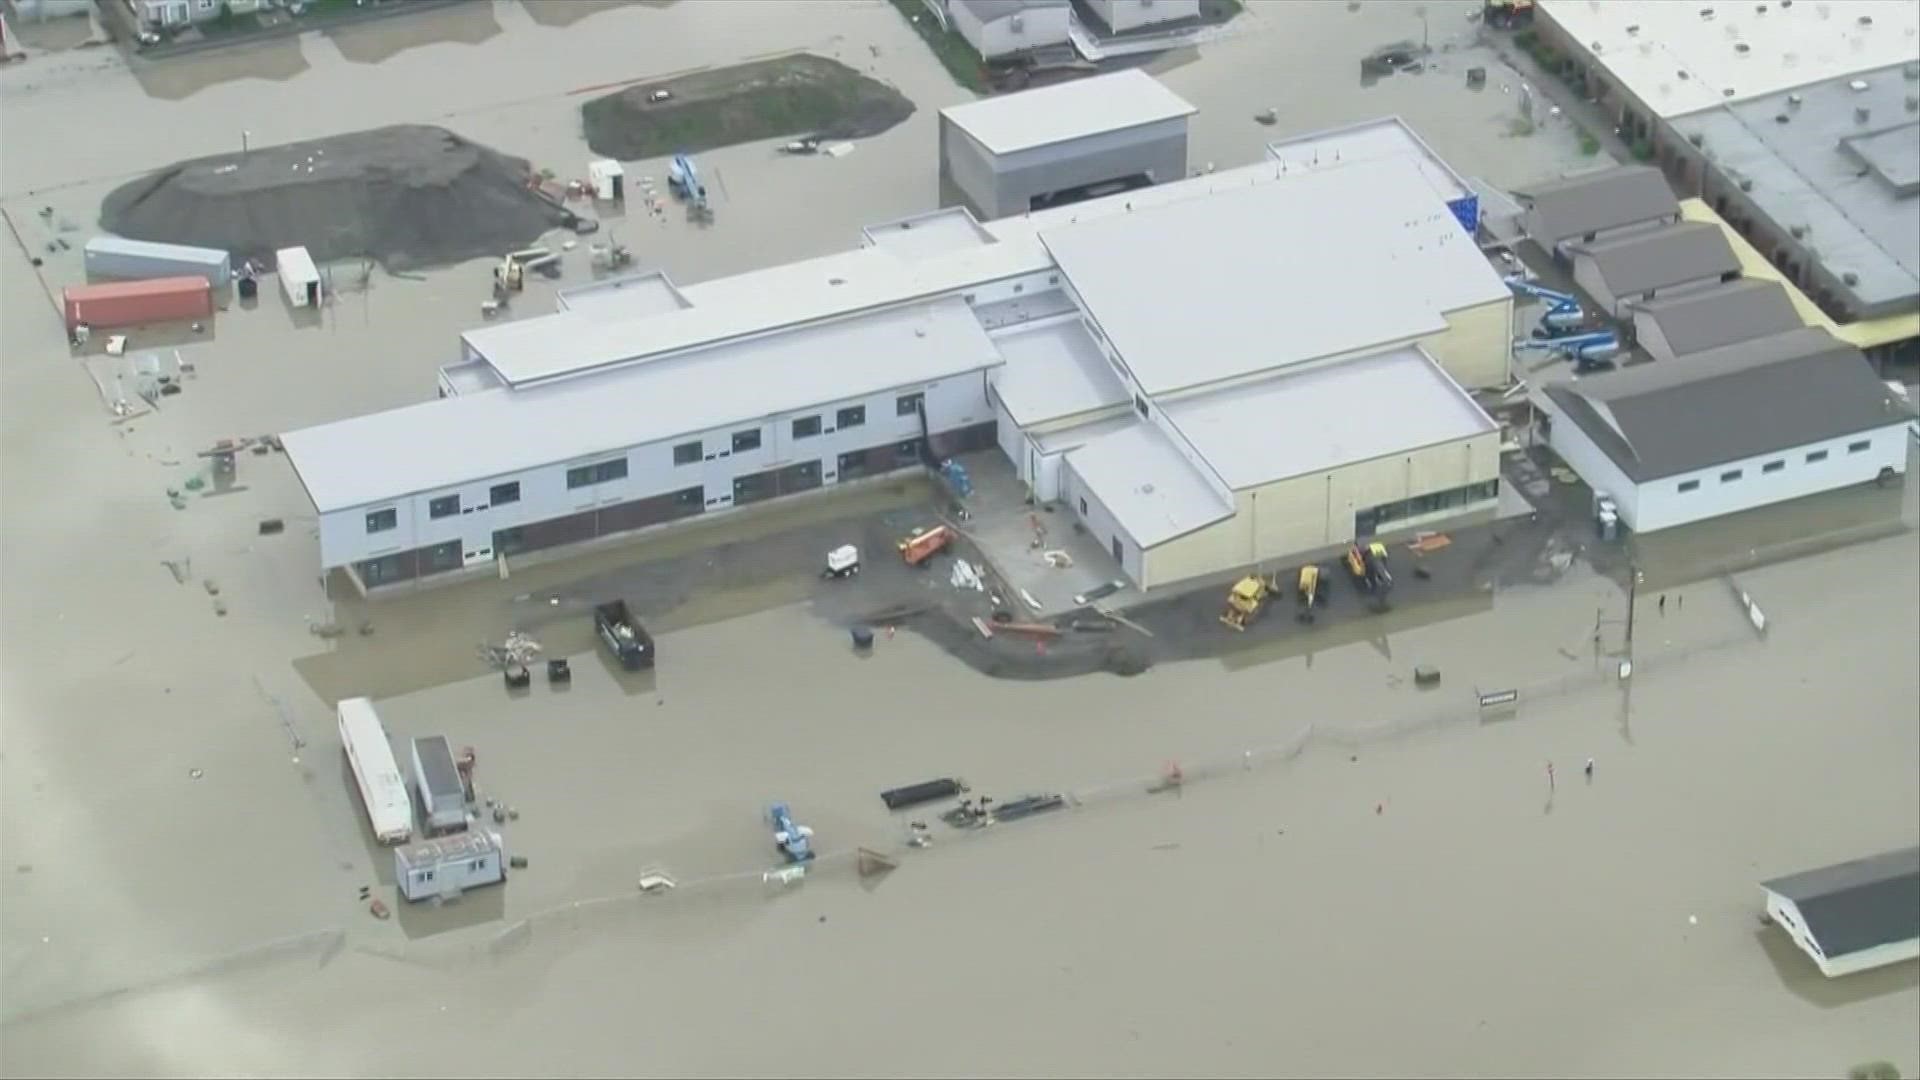 Schools were scheduled to reopen Monday, but the threat of even more flooding kept them closed.